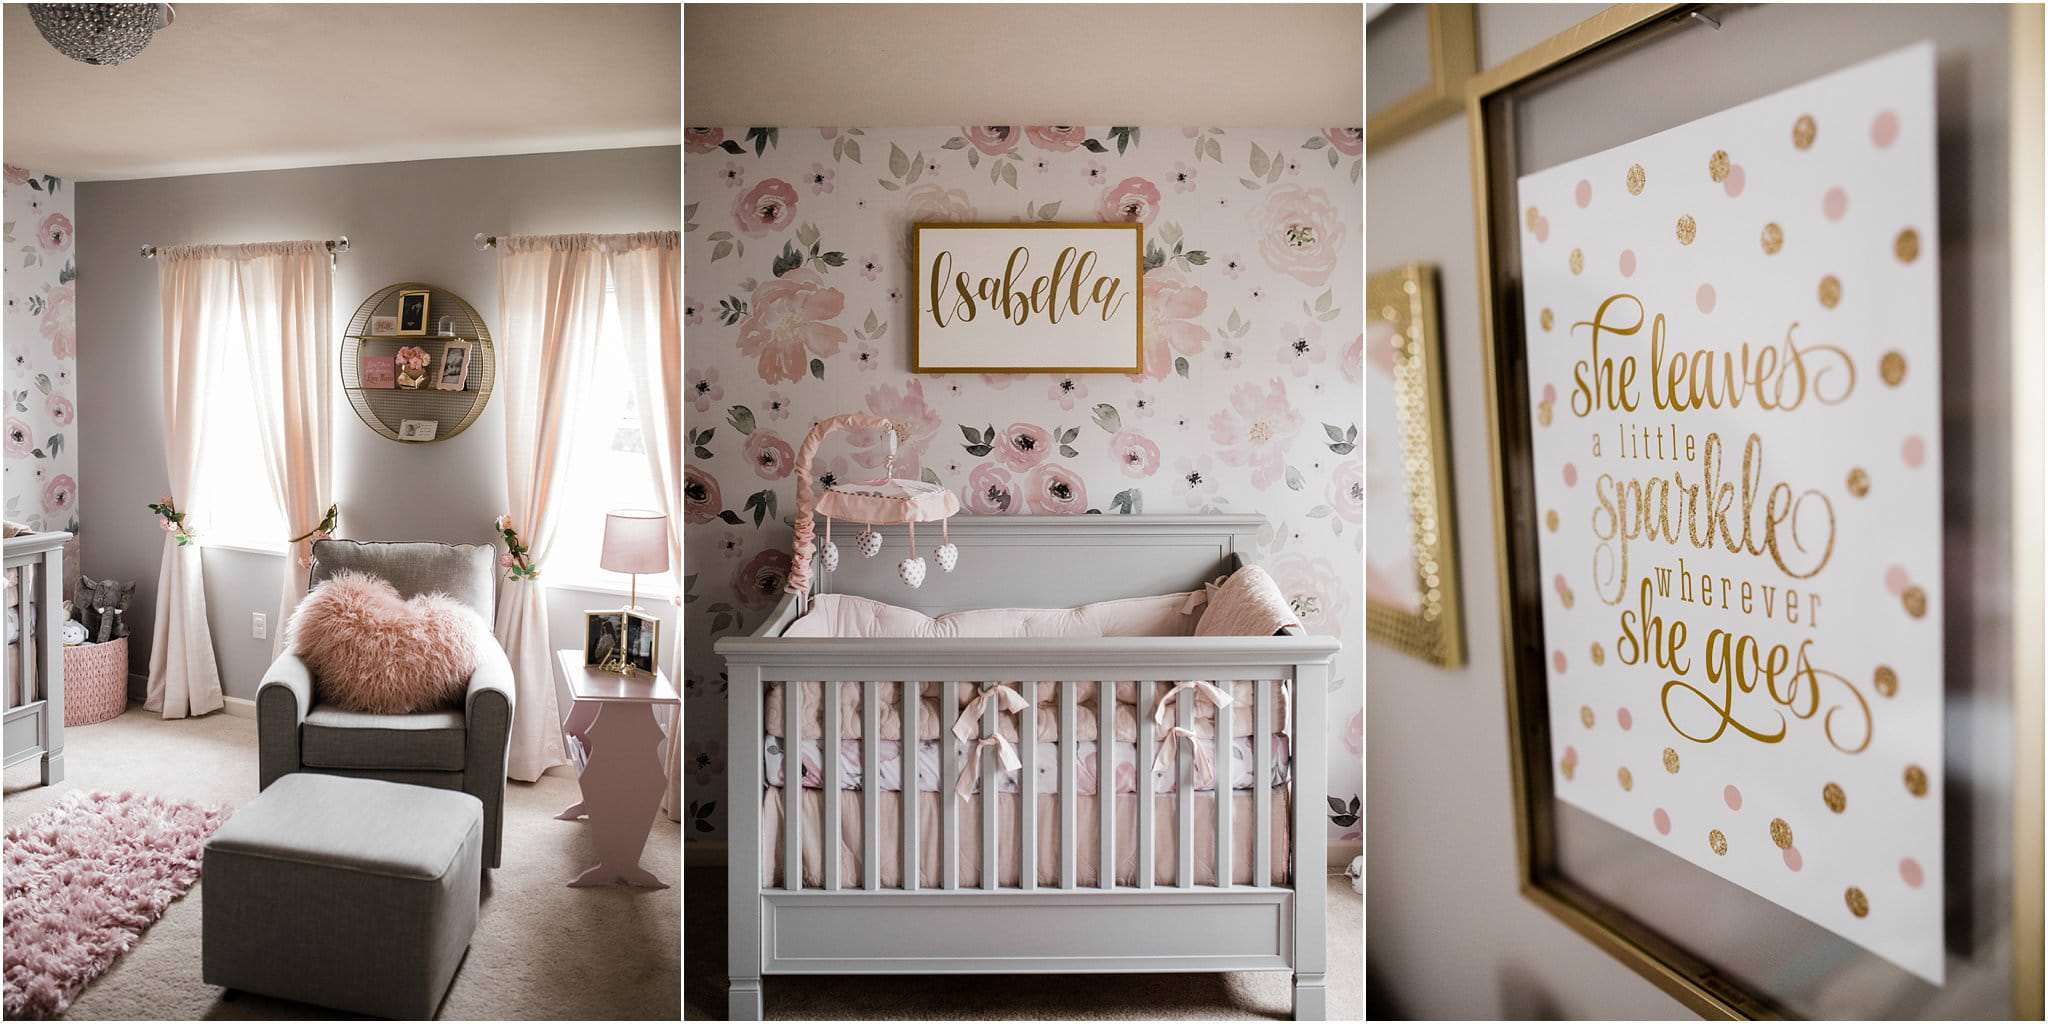 Floral wallpaper and crib sheets with gold accent nursery decor